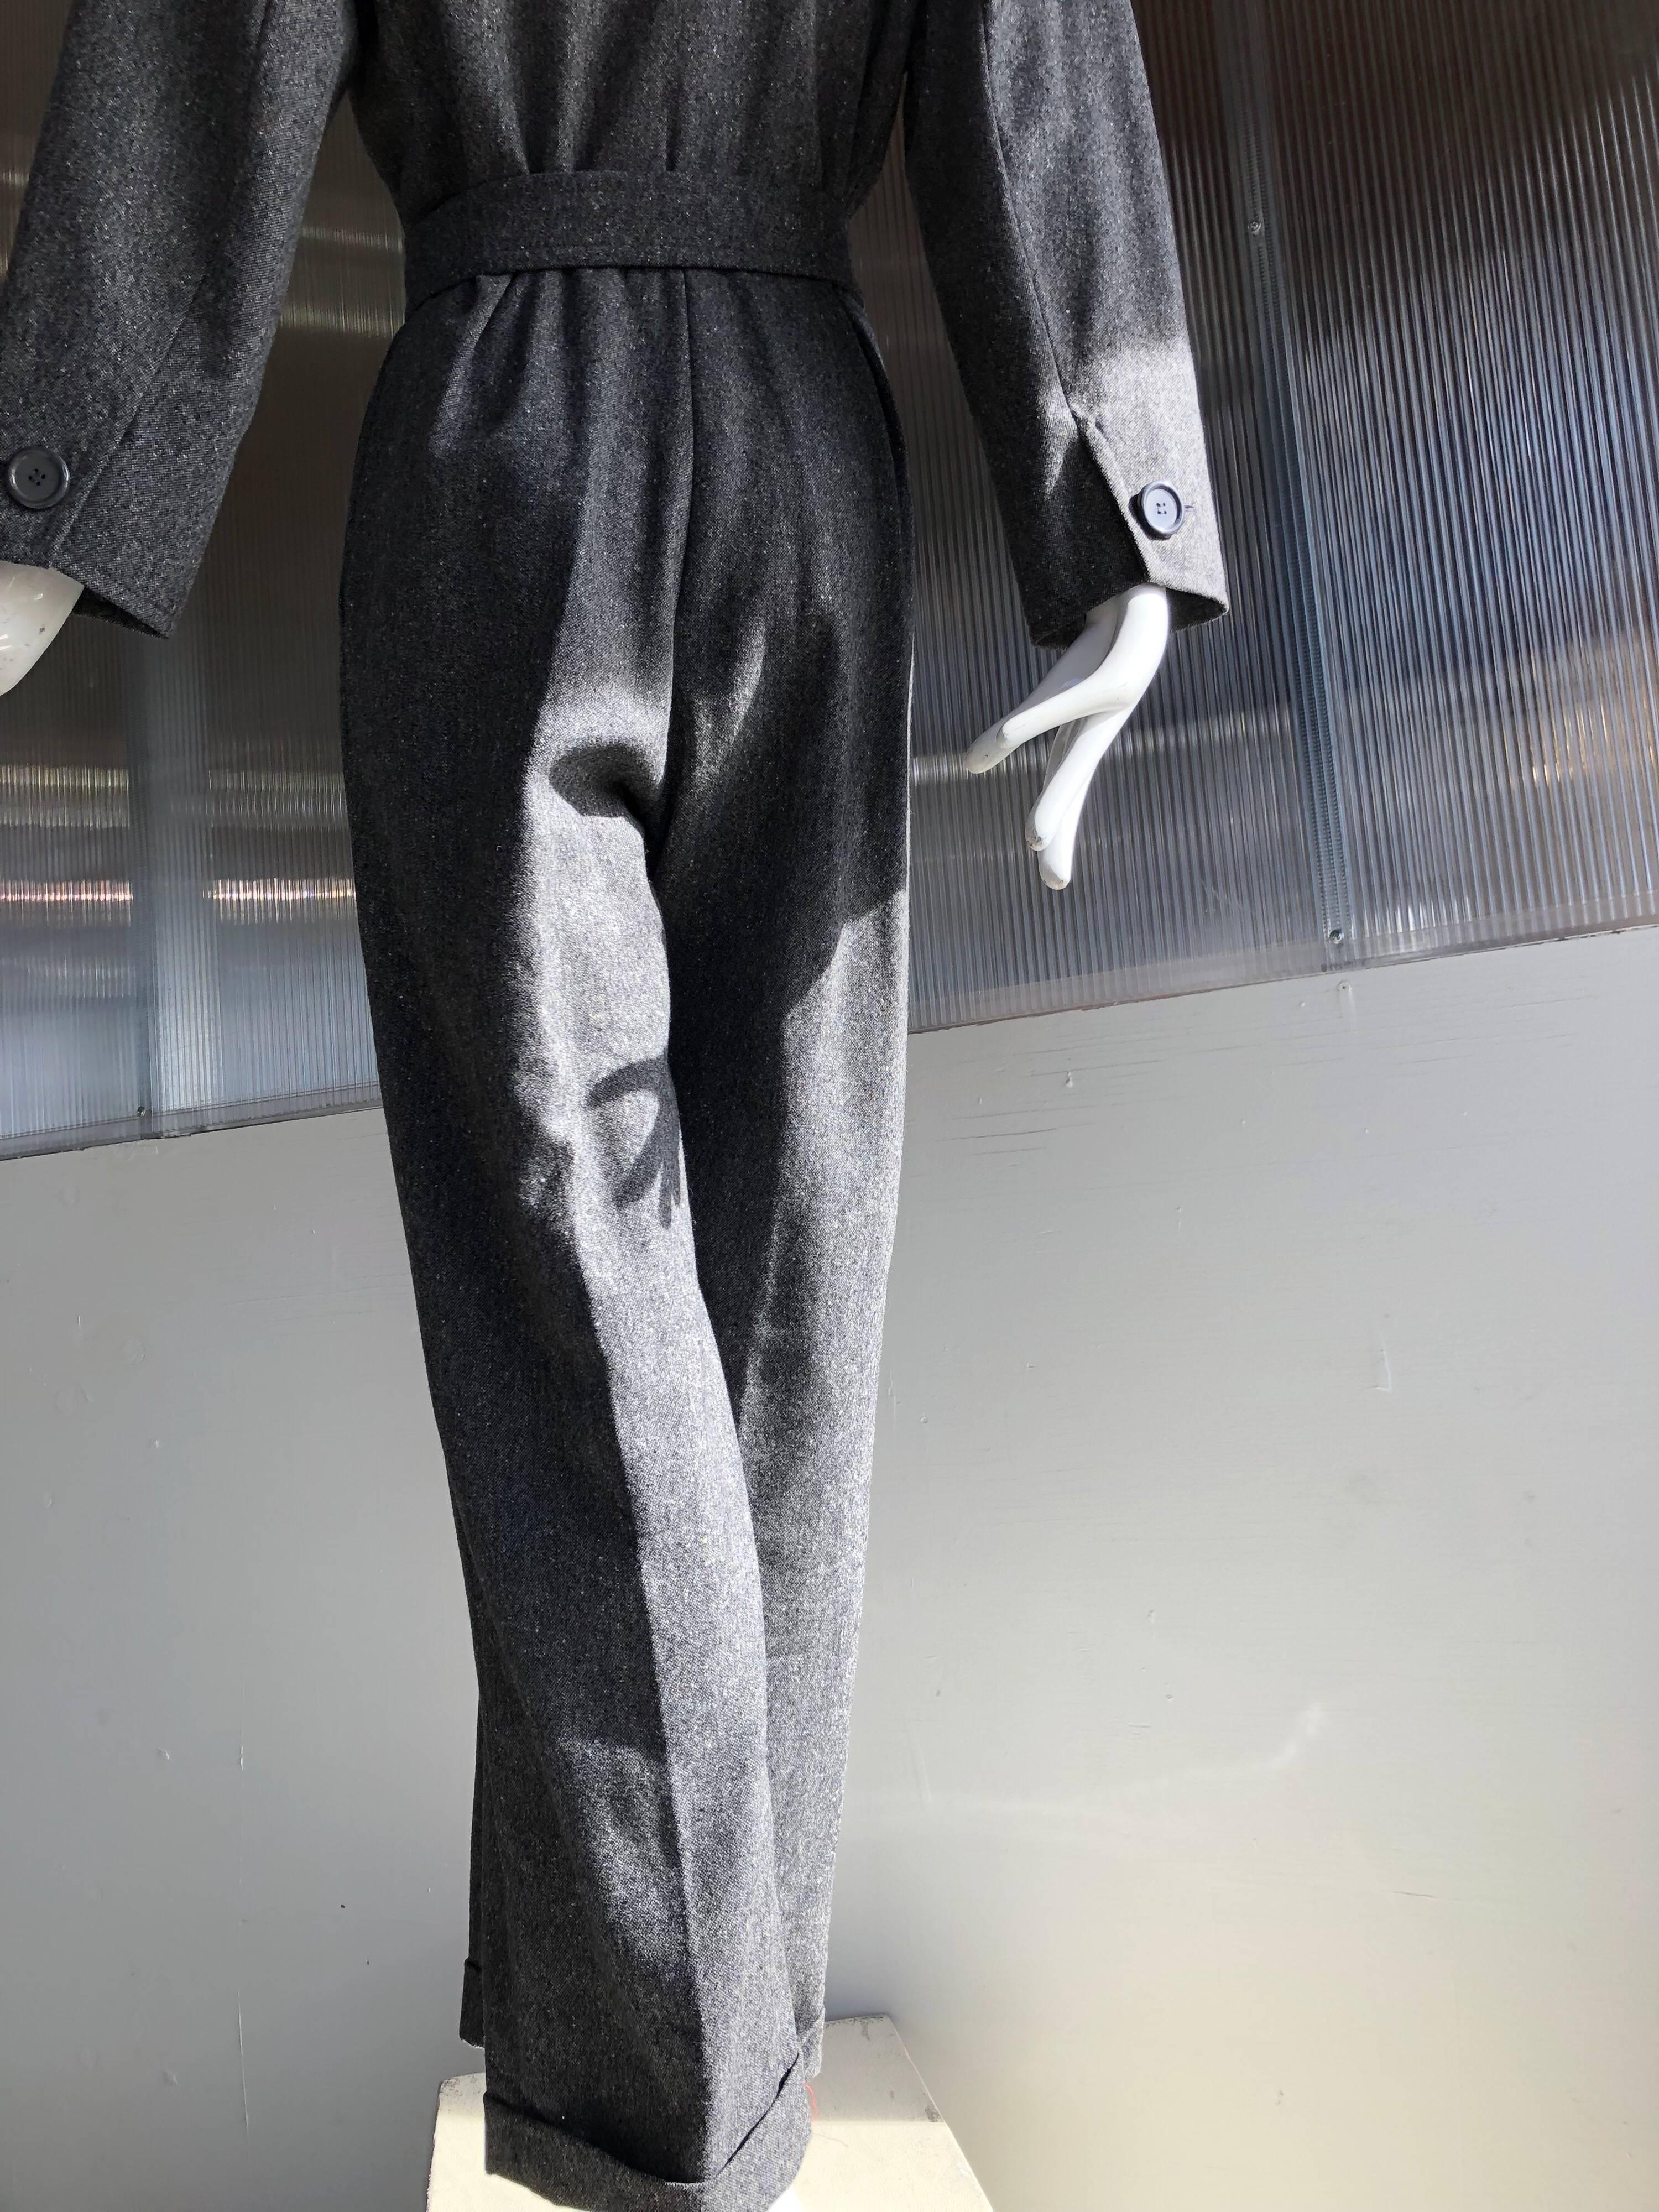 Women's 1980s Yves Saint Laurent Menswear-Style Belted Charcoal Wool Jumpsuit